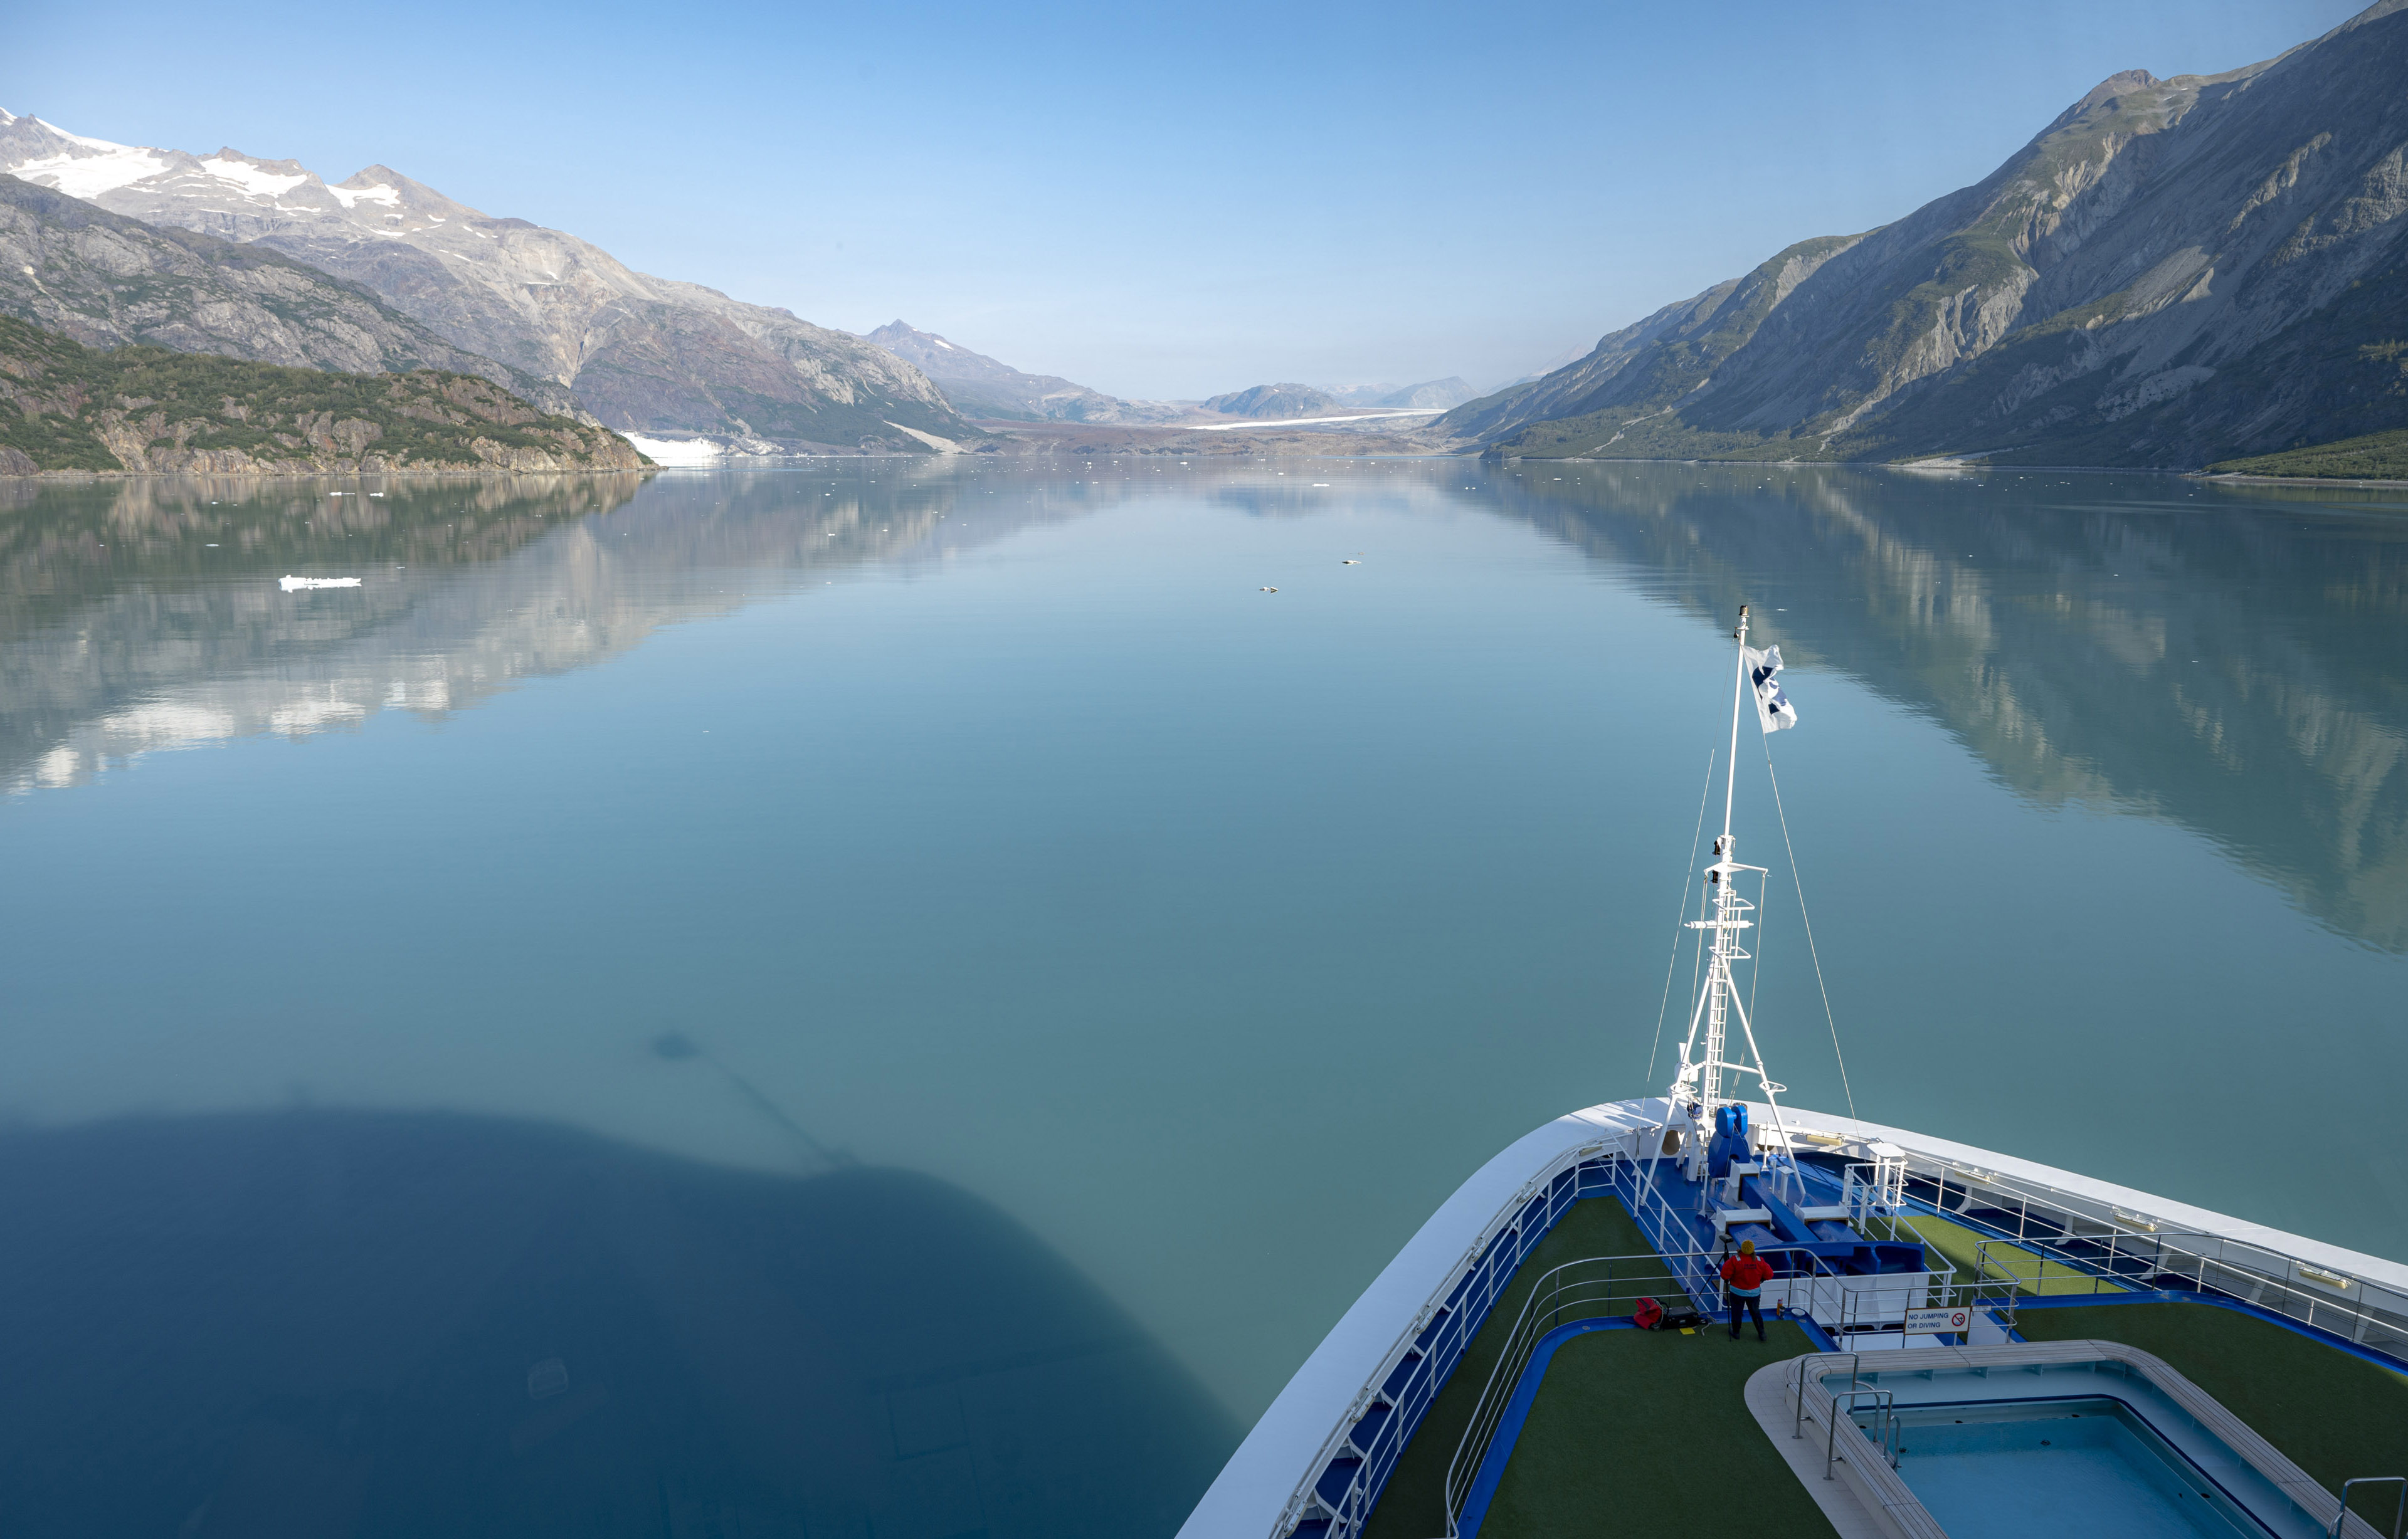 The bow of a cruise ship motoring through picturesque green water in a large valley. The shadow of the ship's bow is projected on the water on this blue sky day.